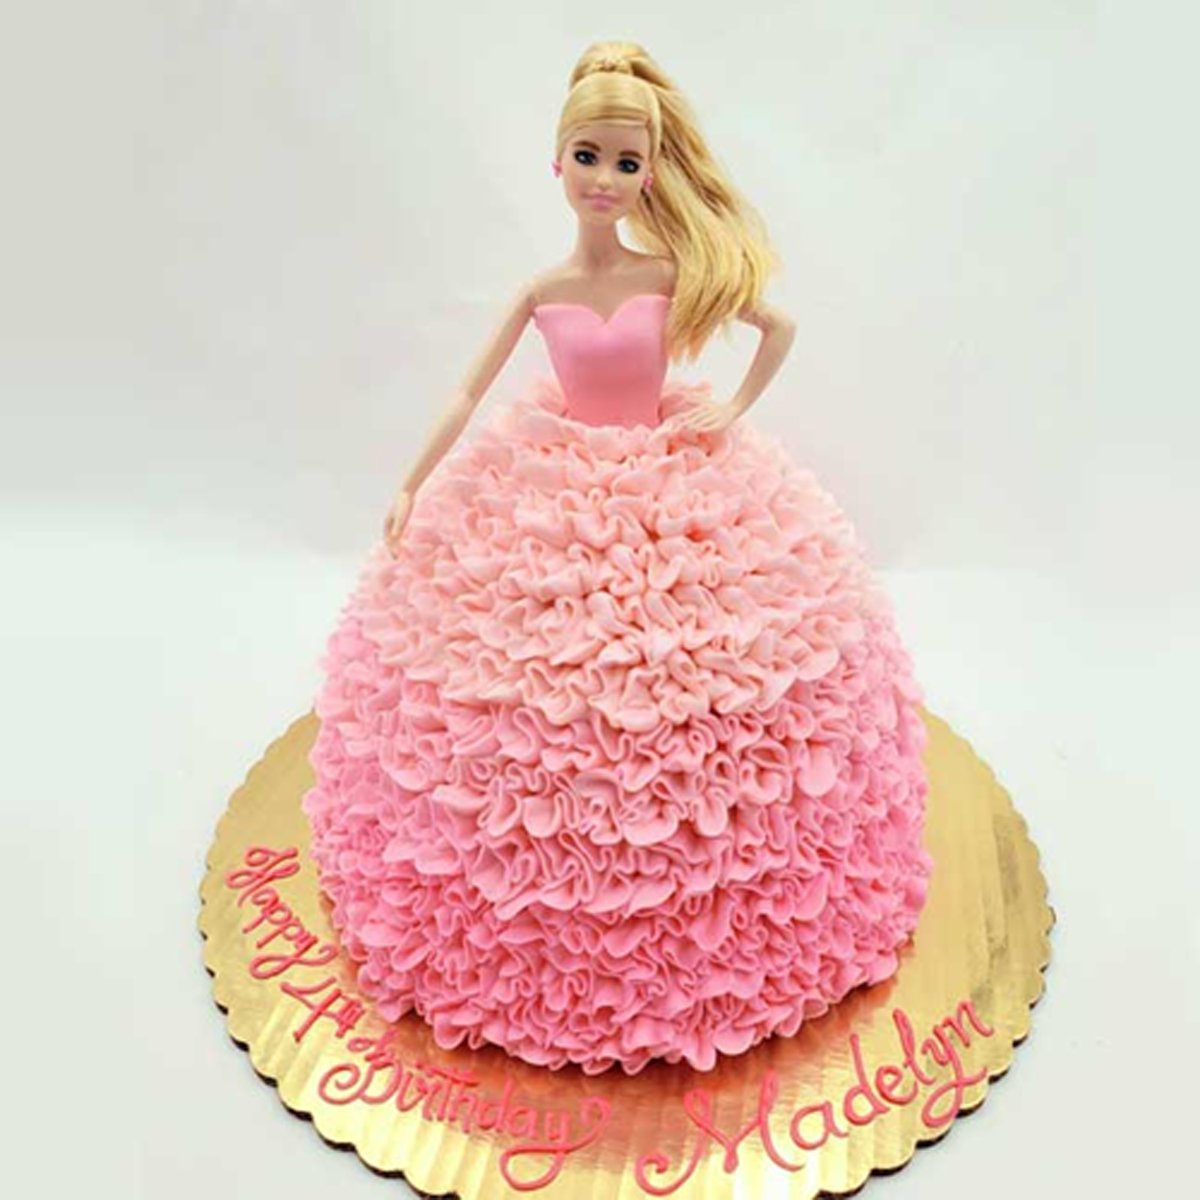 Perfect Barbie Doll Cake icing with Whipped and Buttercream Frosting Recipe  |🎂😊ඩෝල් කේක් #wonderful - YouTube